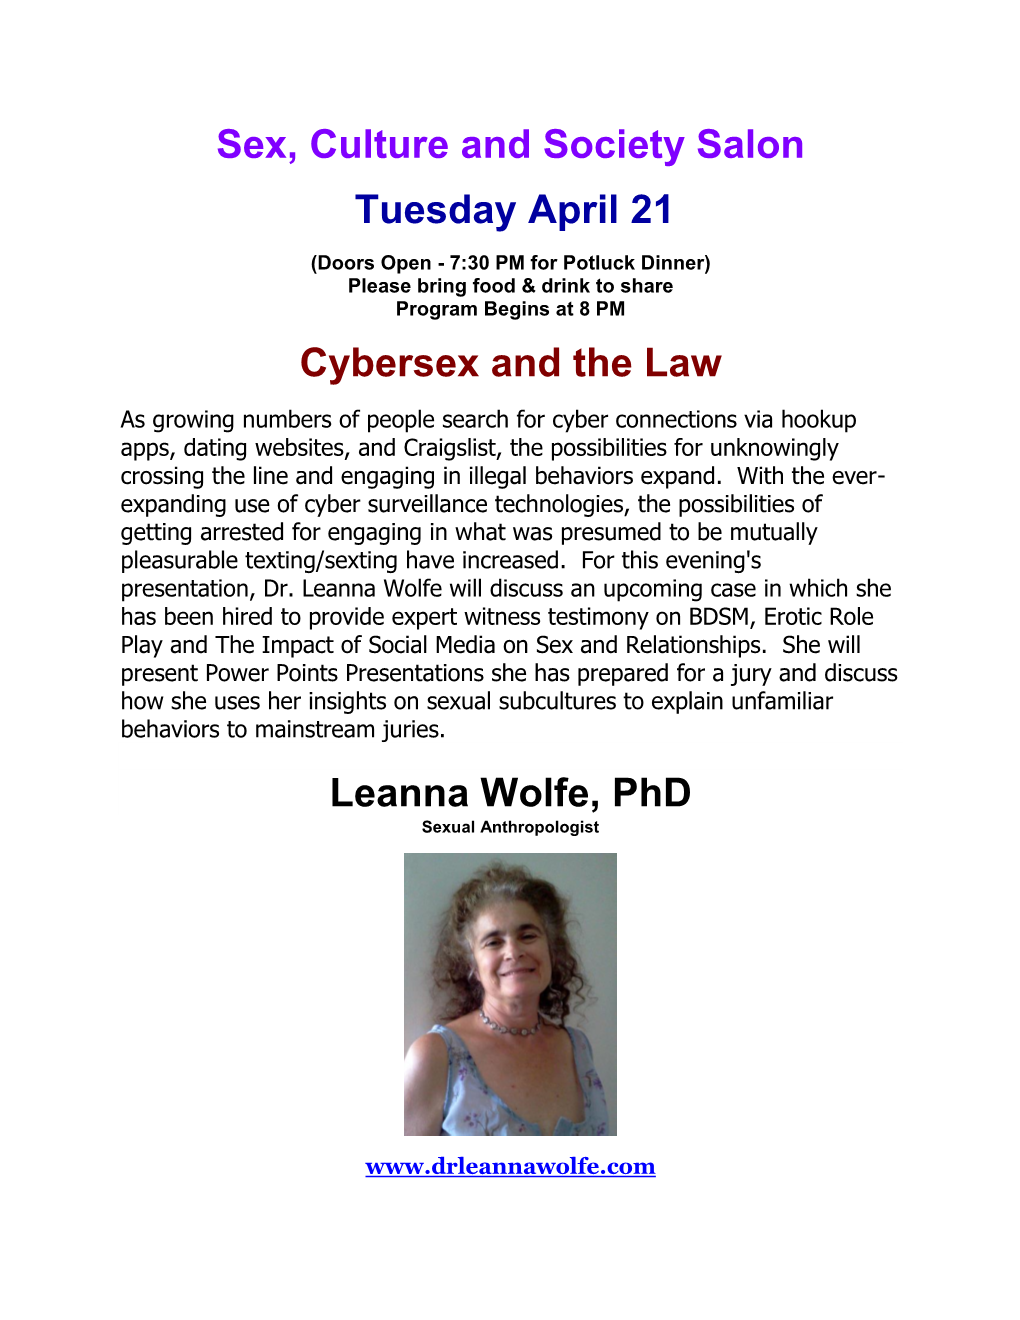 Sex, Culture and Society Salon Tuesday April 21 Cybersex and The